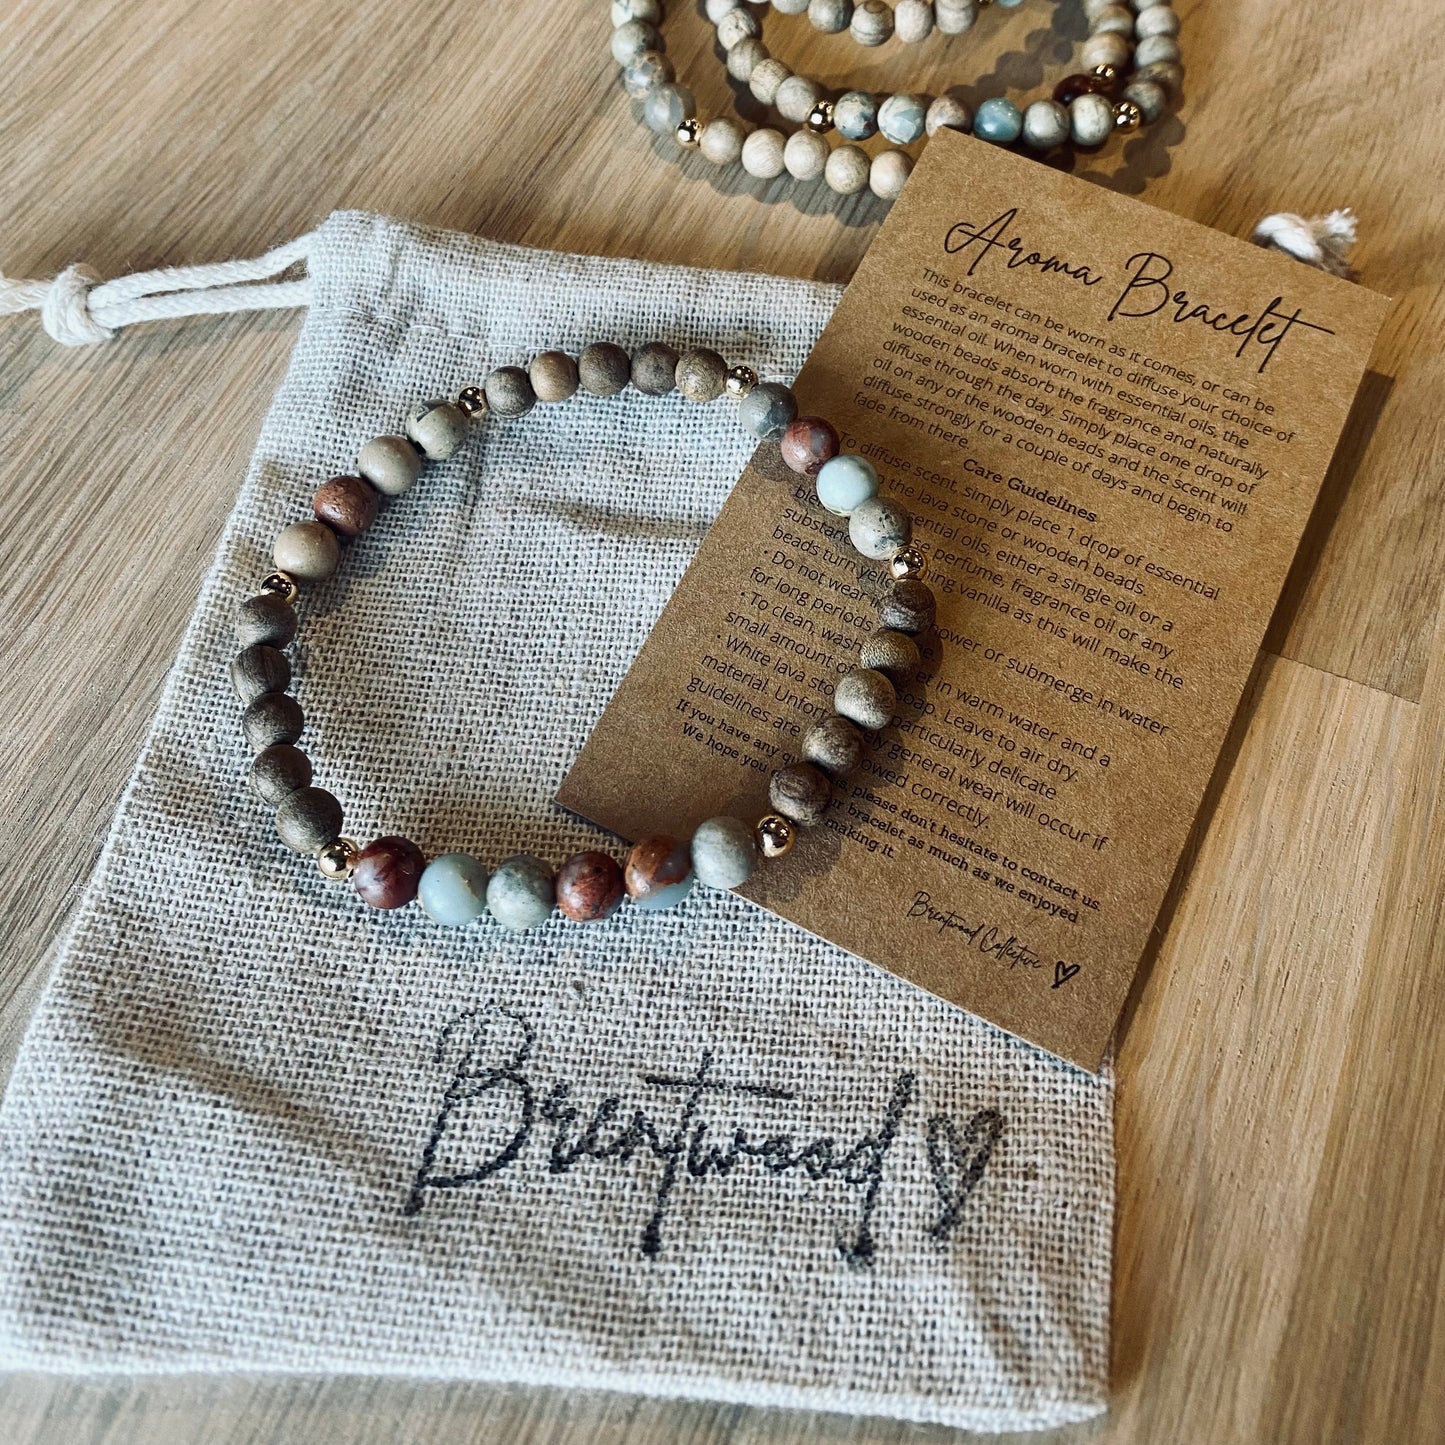 Aqua Terra Jasper aroma bracelet/diffuser bracelet made from 6mm Aqua Terra Jasper & natural burly wood beads with 18k gold plated embellishments. Laid on cloth pouch/drawstring bag stamped with “Brentwood” and an aroma bracelet information and care card on kraft brown card. 